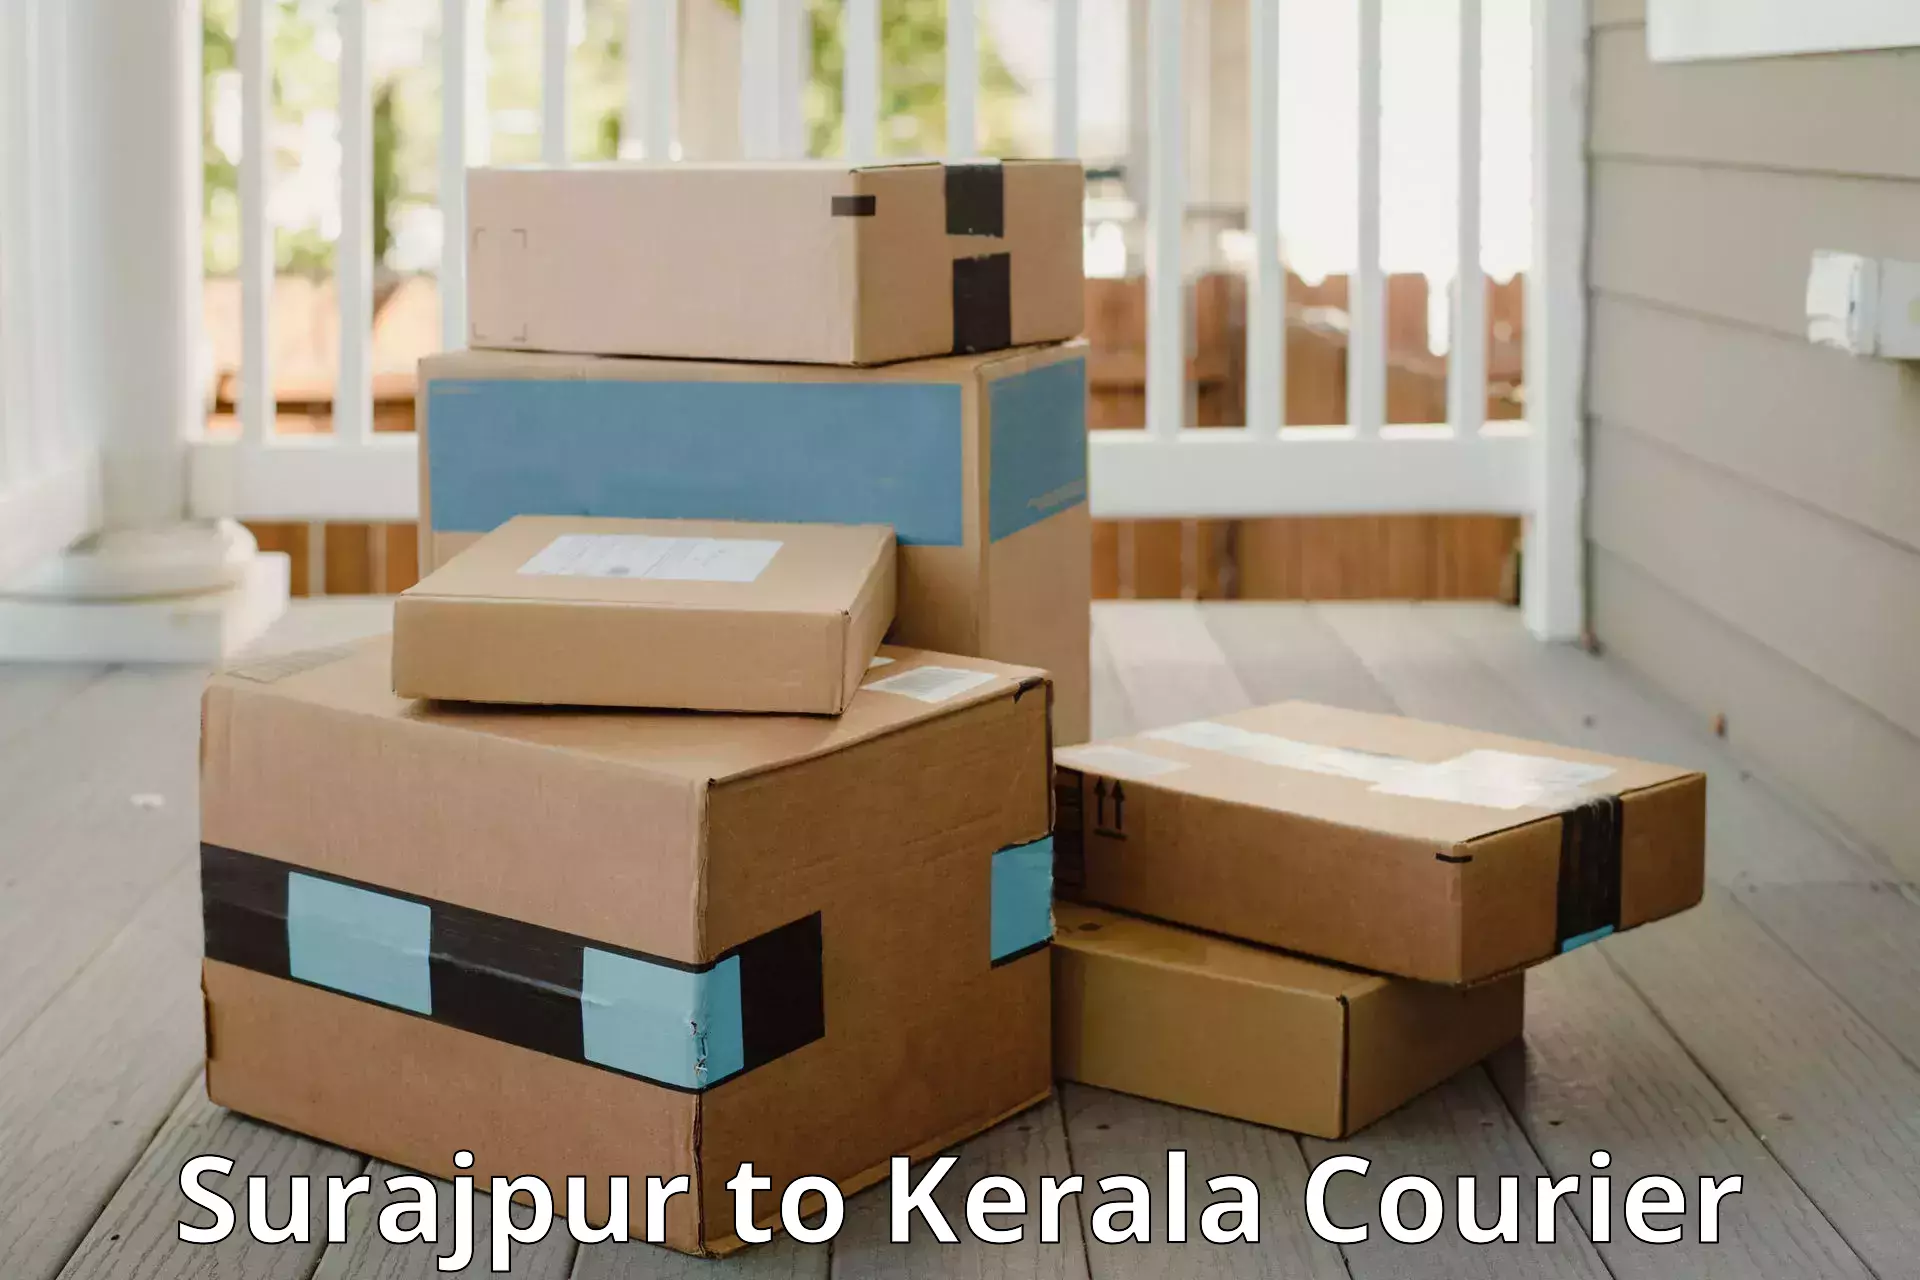 Express luggage delivery Surajpur to Cochin Port Kochi